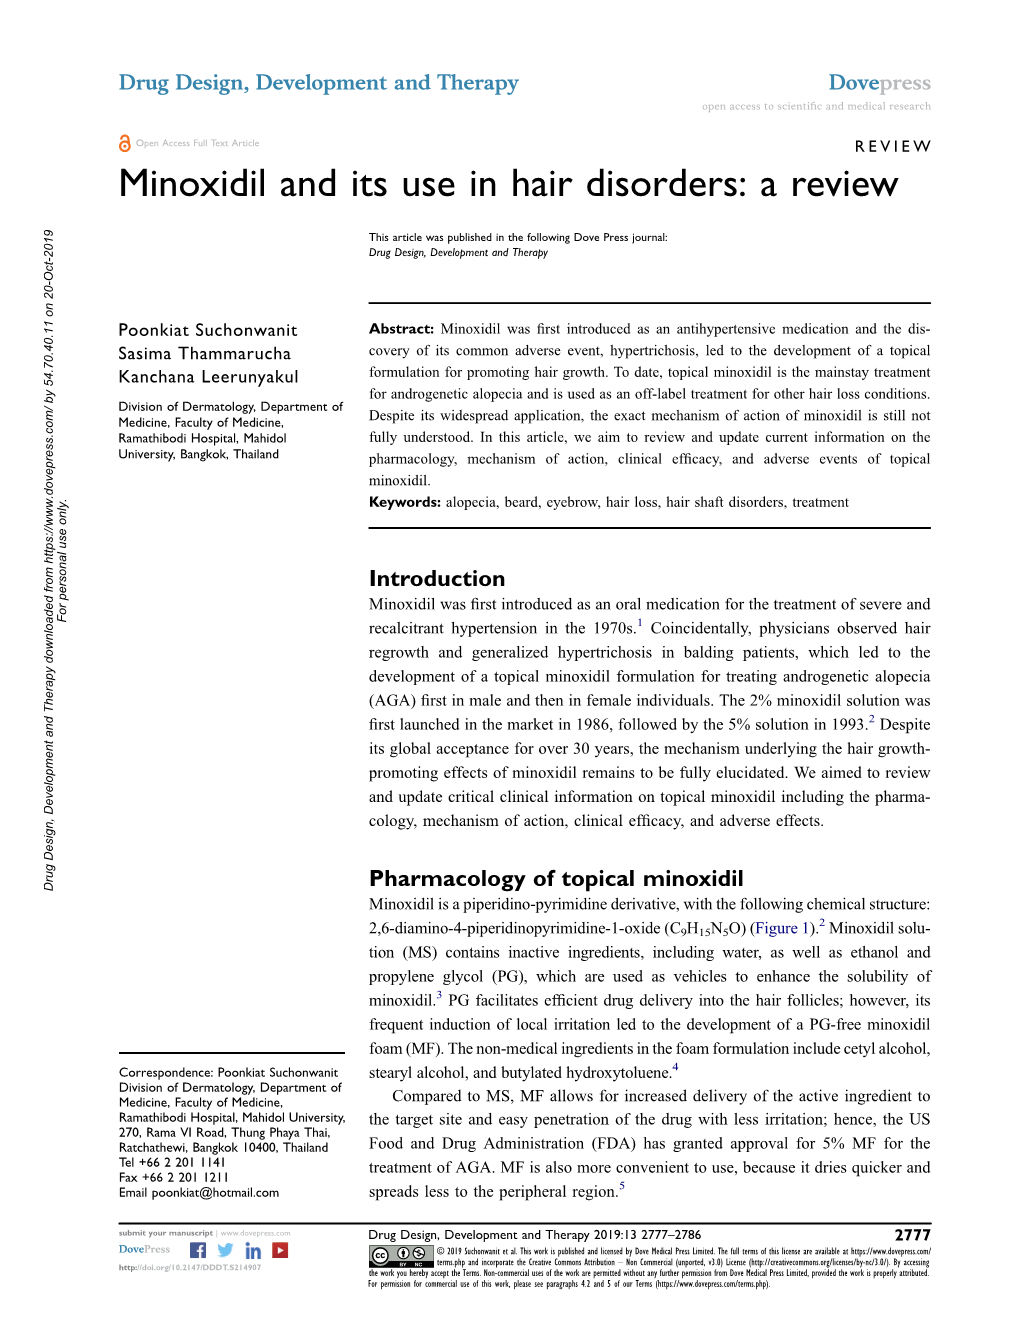 Minoxidil and Its Use in Hair Disorders: a Review